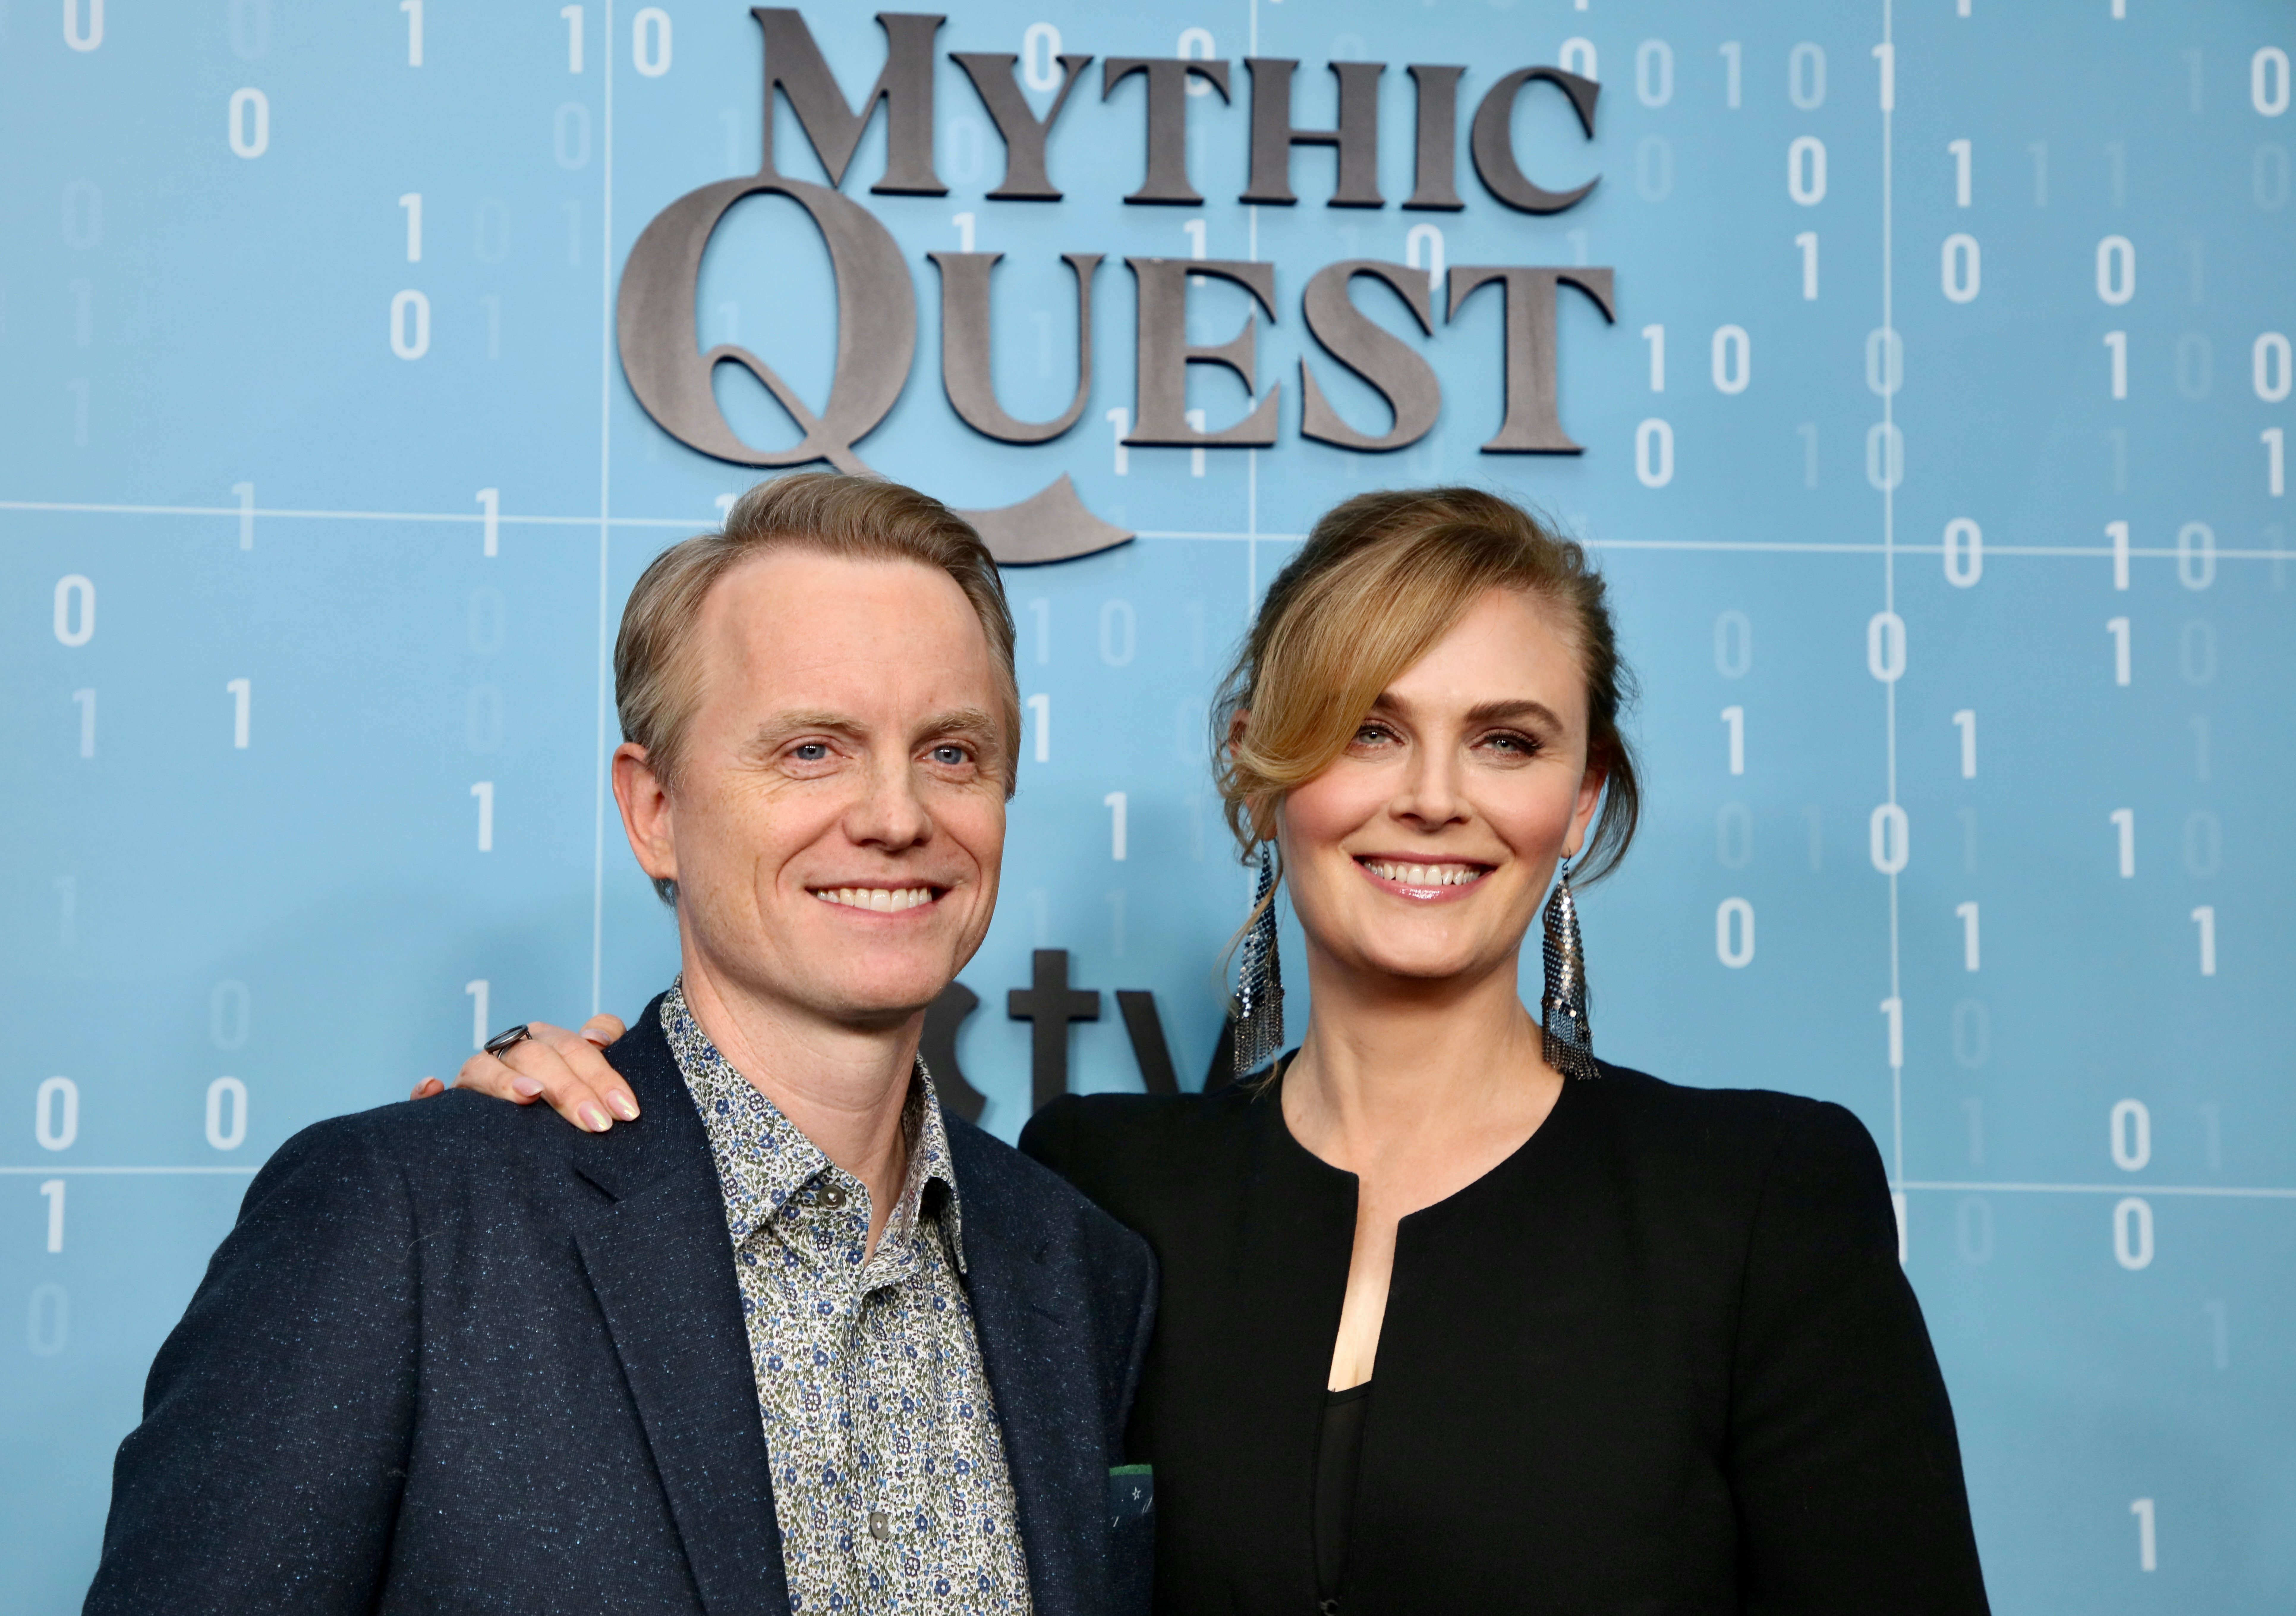 David Hornsby and Emily Deschanel attend the premiere of "Mythic Quest" Season 3 at Linwood Dunn Theater on November 09, 2022, in Hollywood, California. | Source: Getty Images